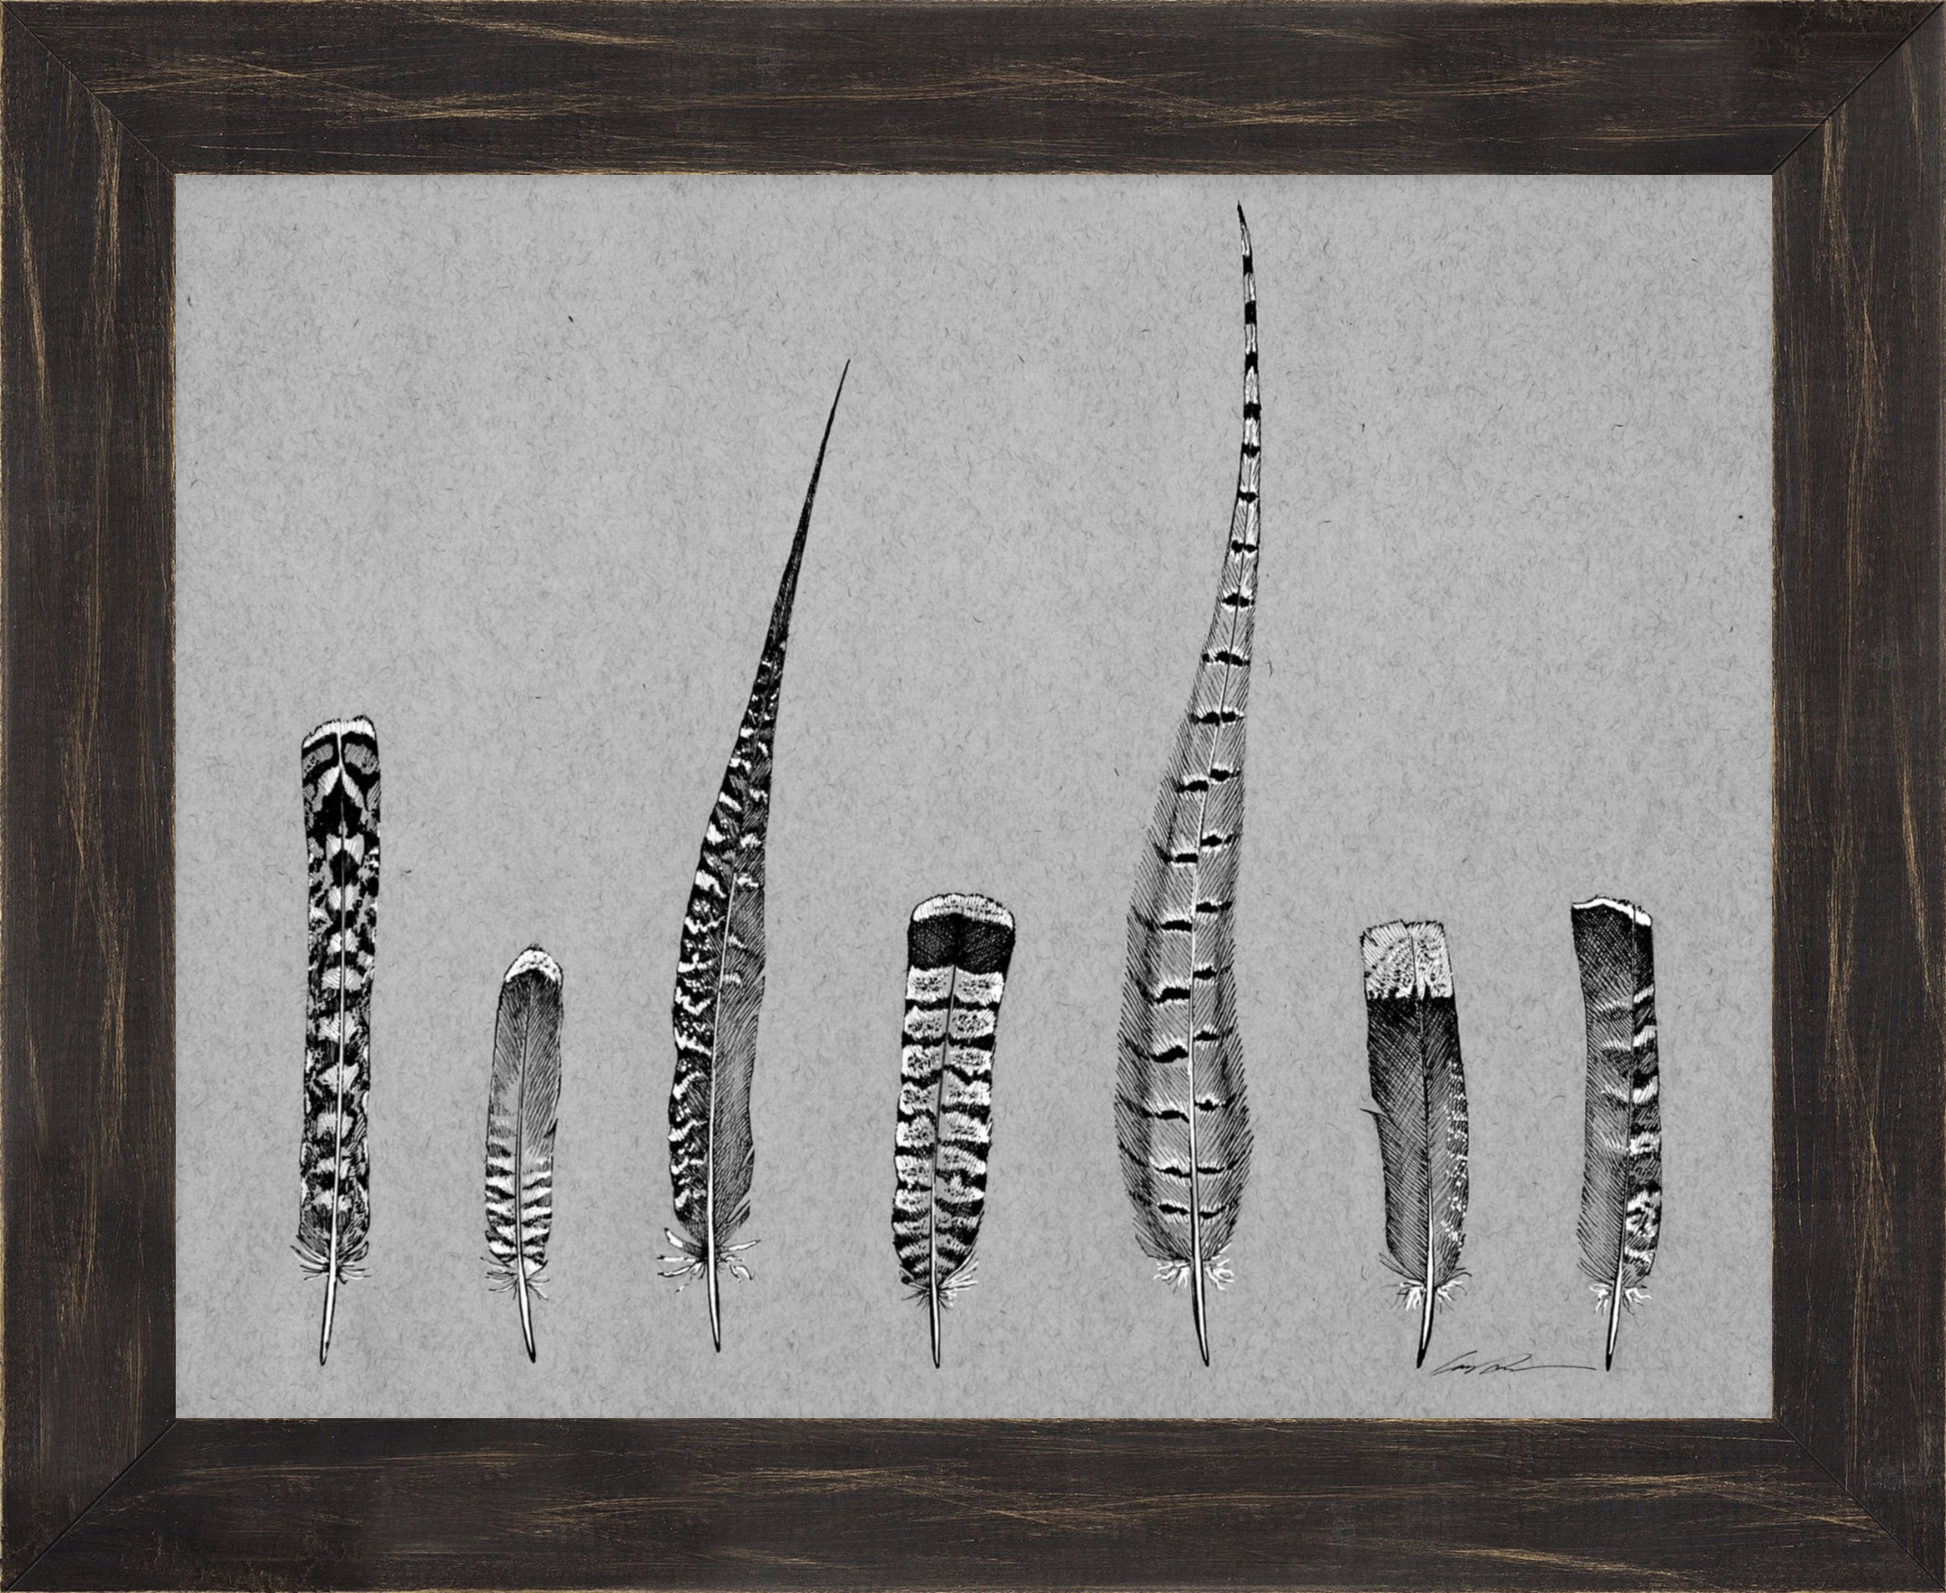 A black and white drawing of 7 upland bird feathers on gray paper, framed in a black rustic frame